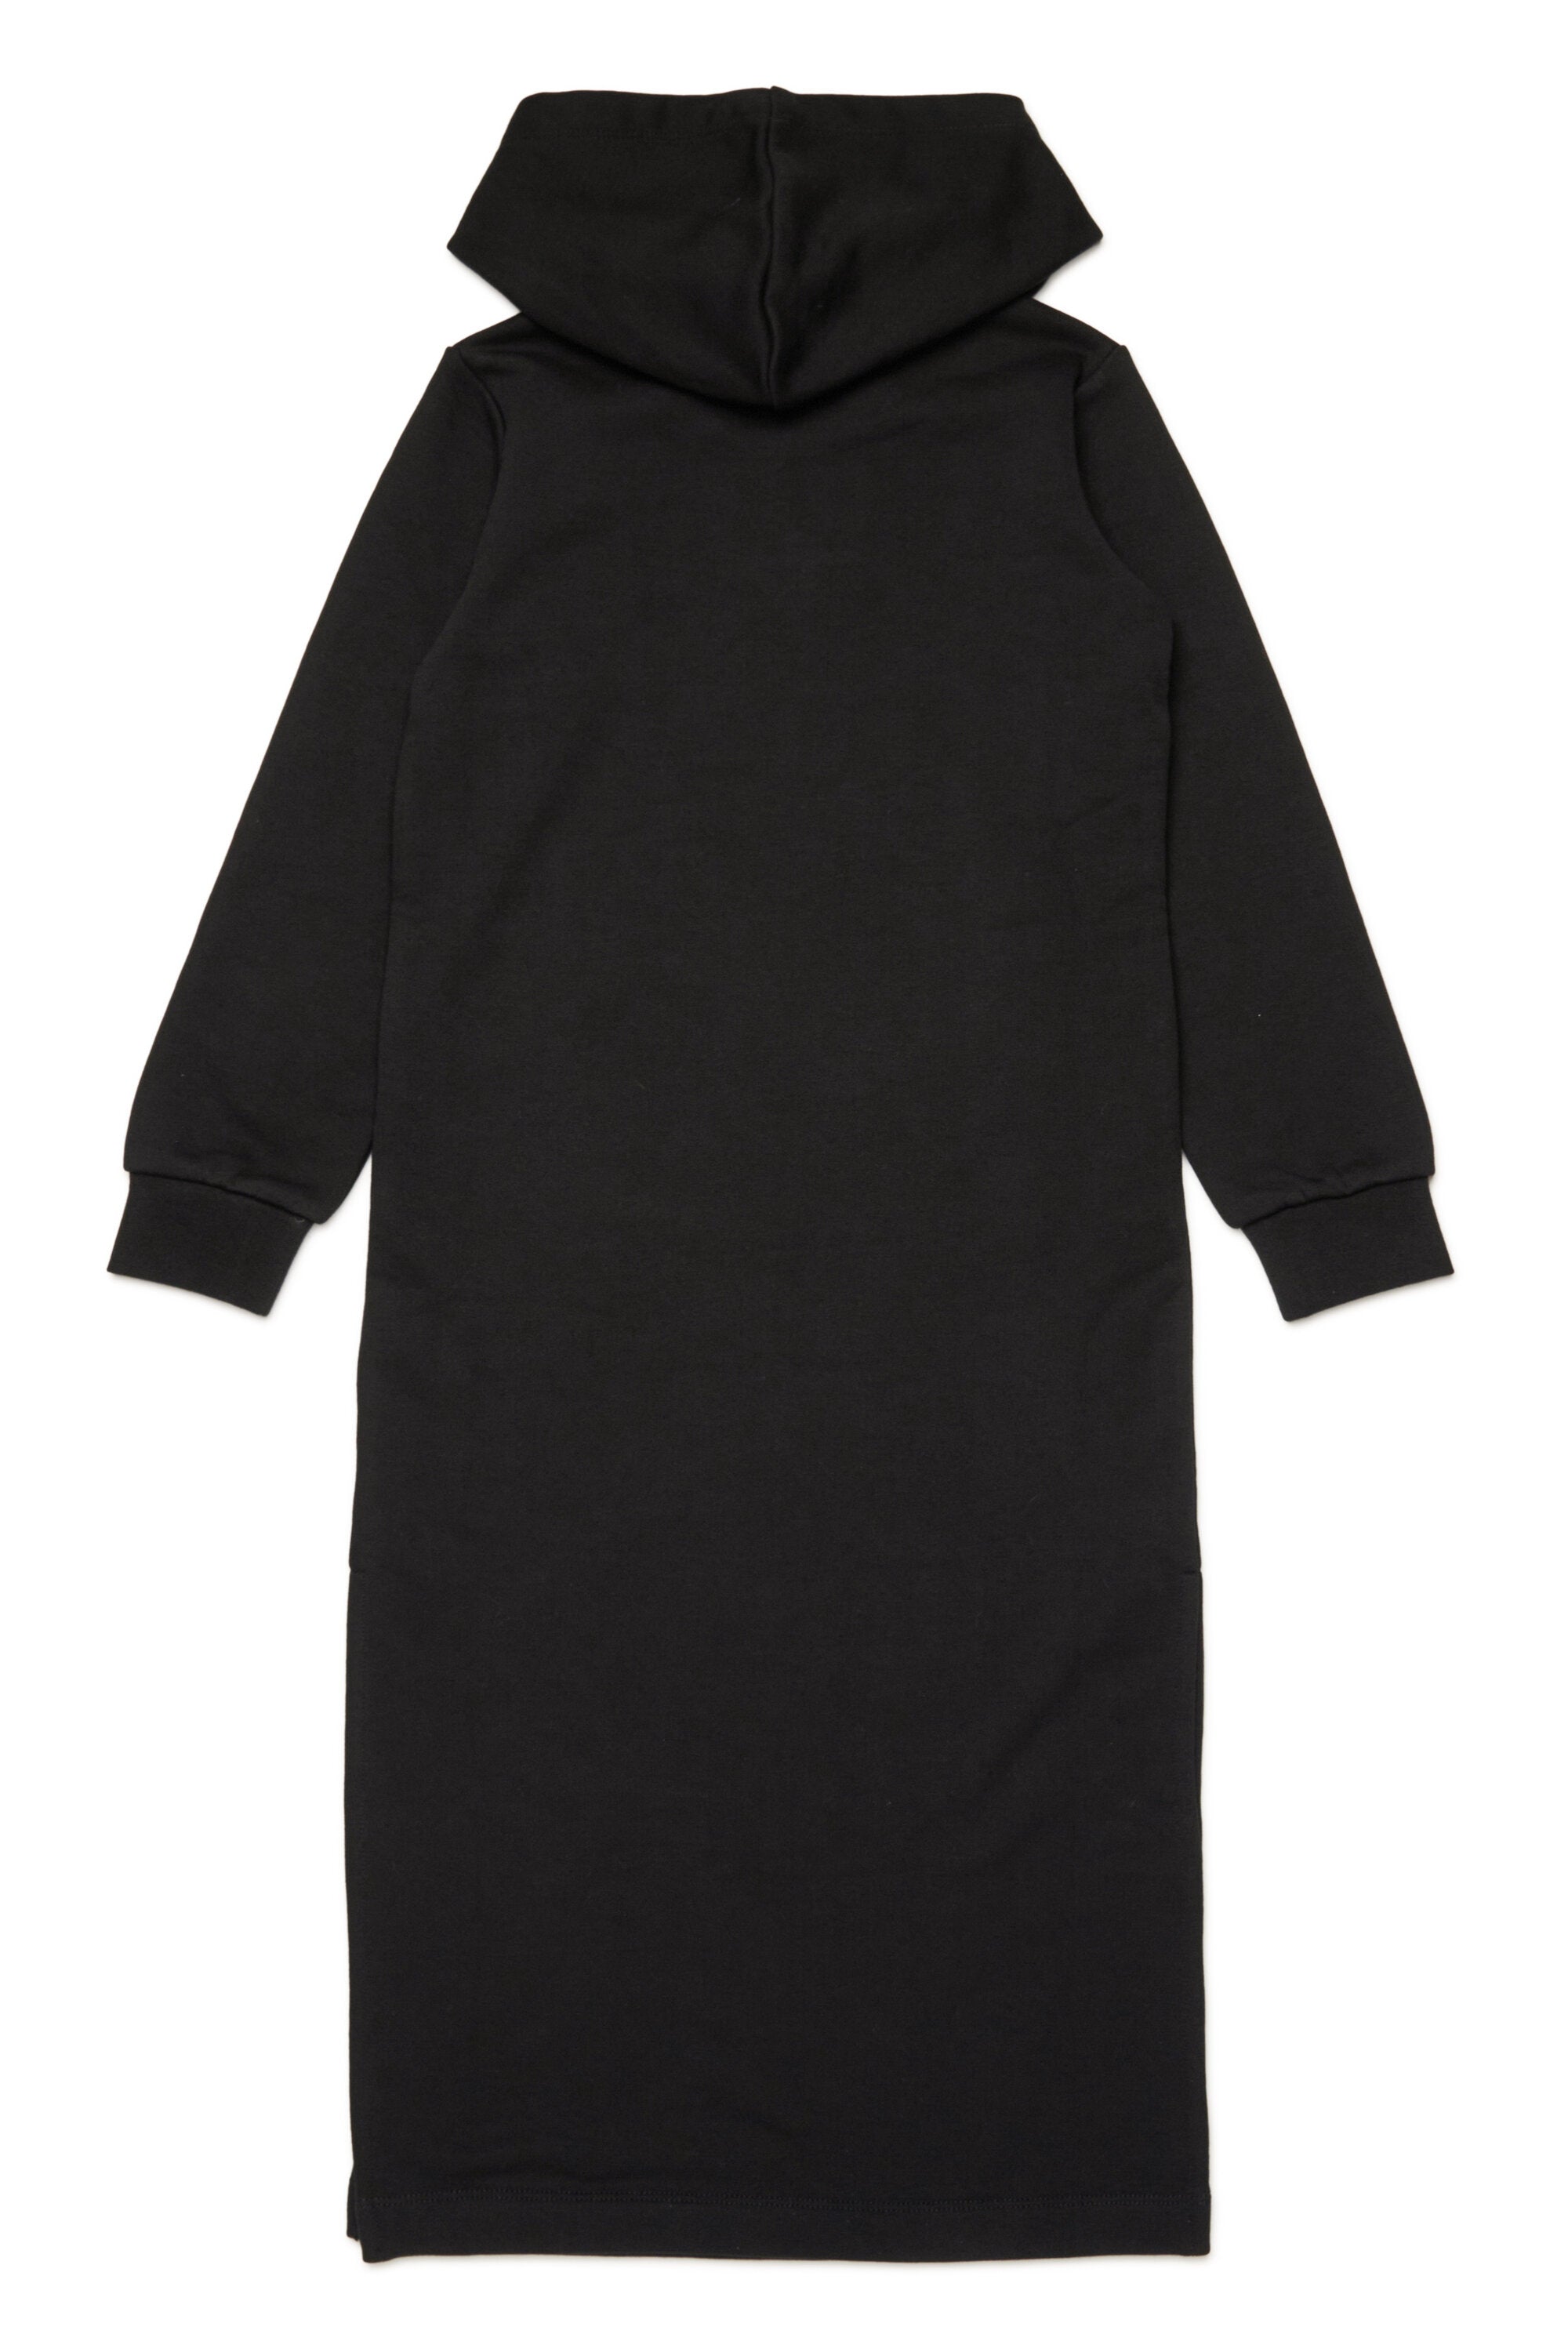 Maxi sweatshirt dress with embroidered oval D logo